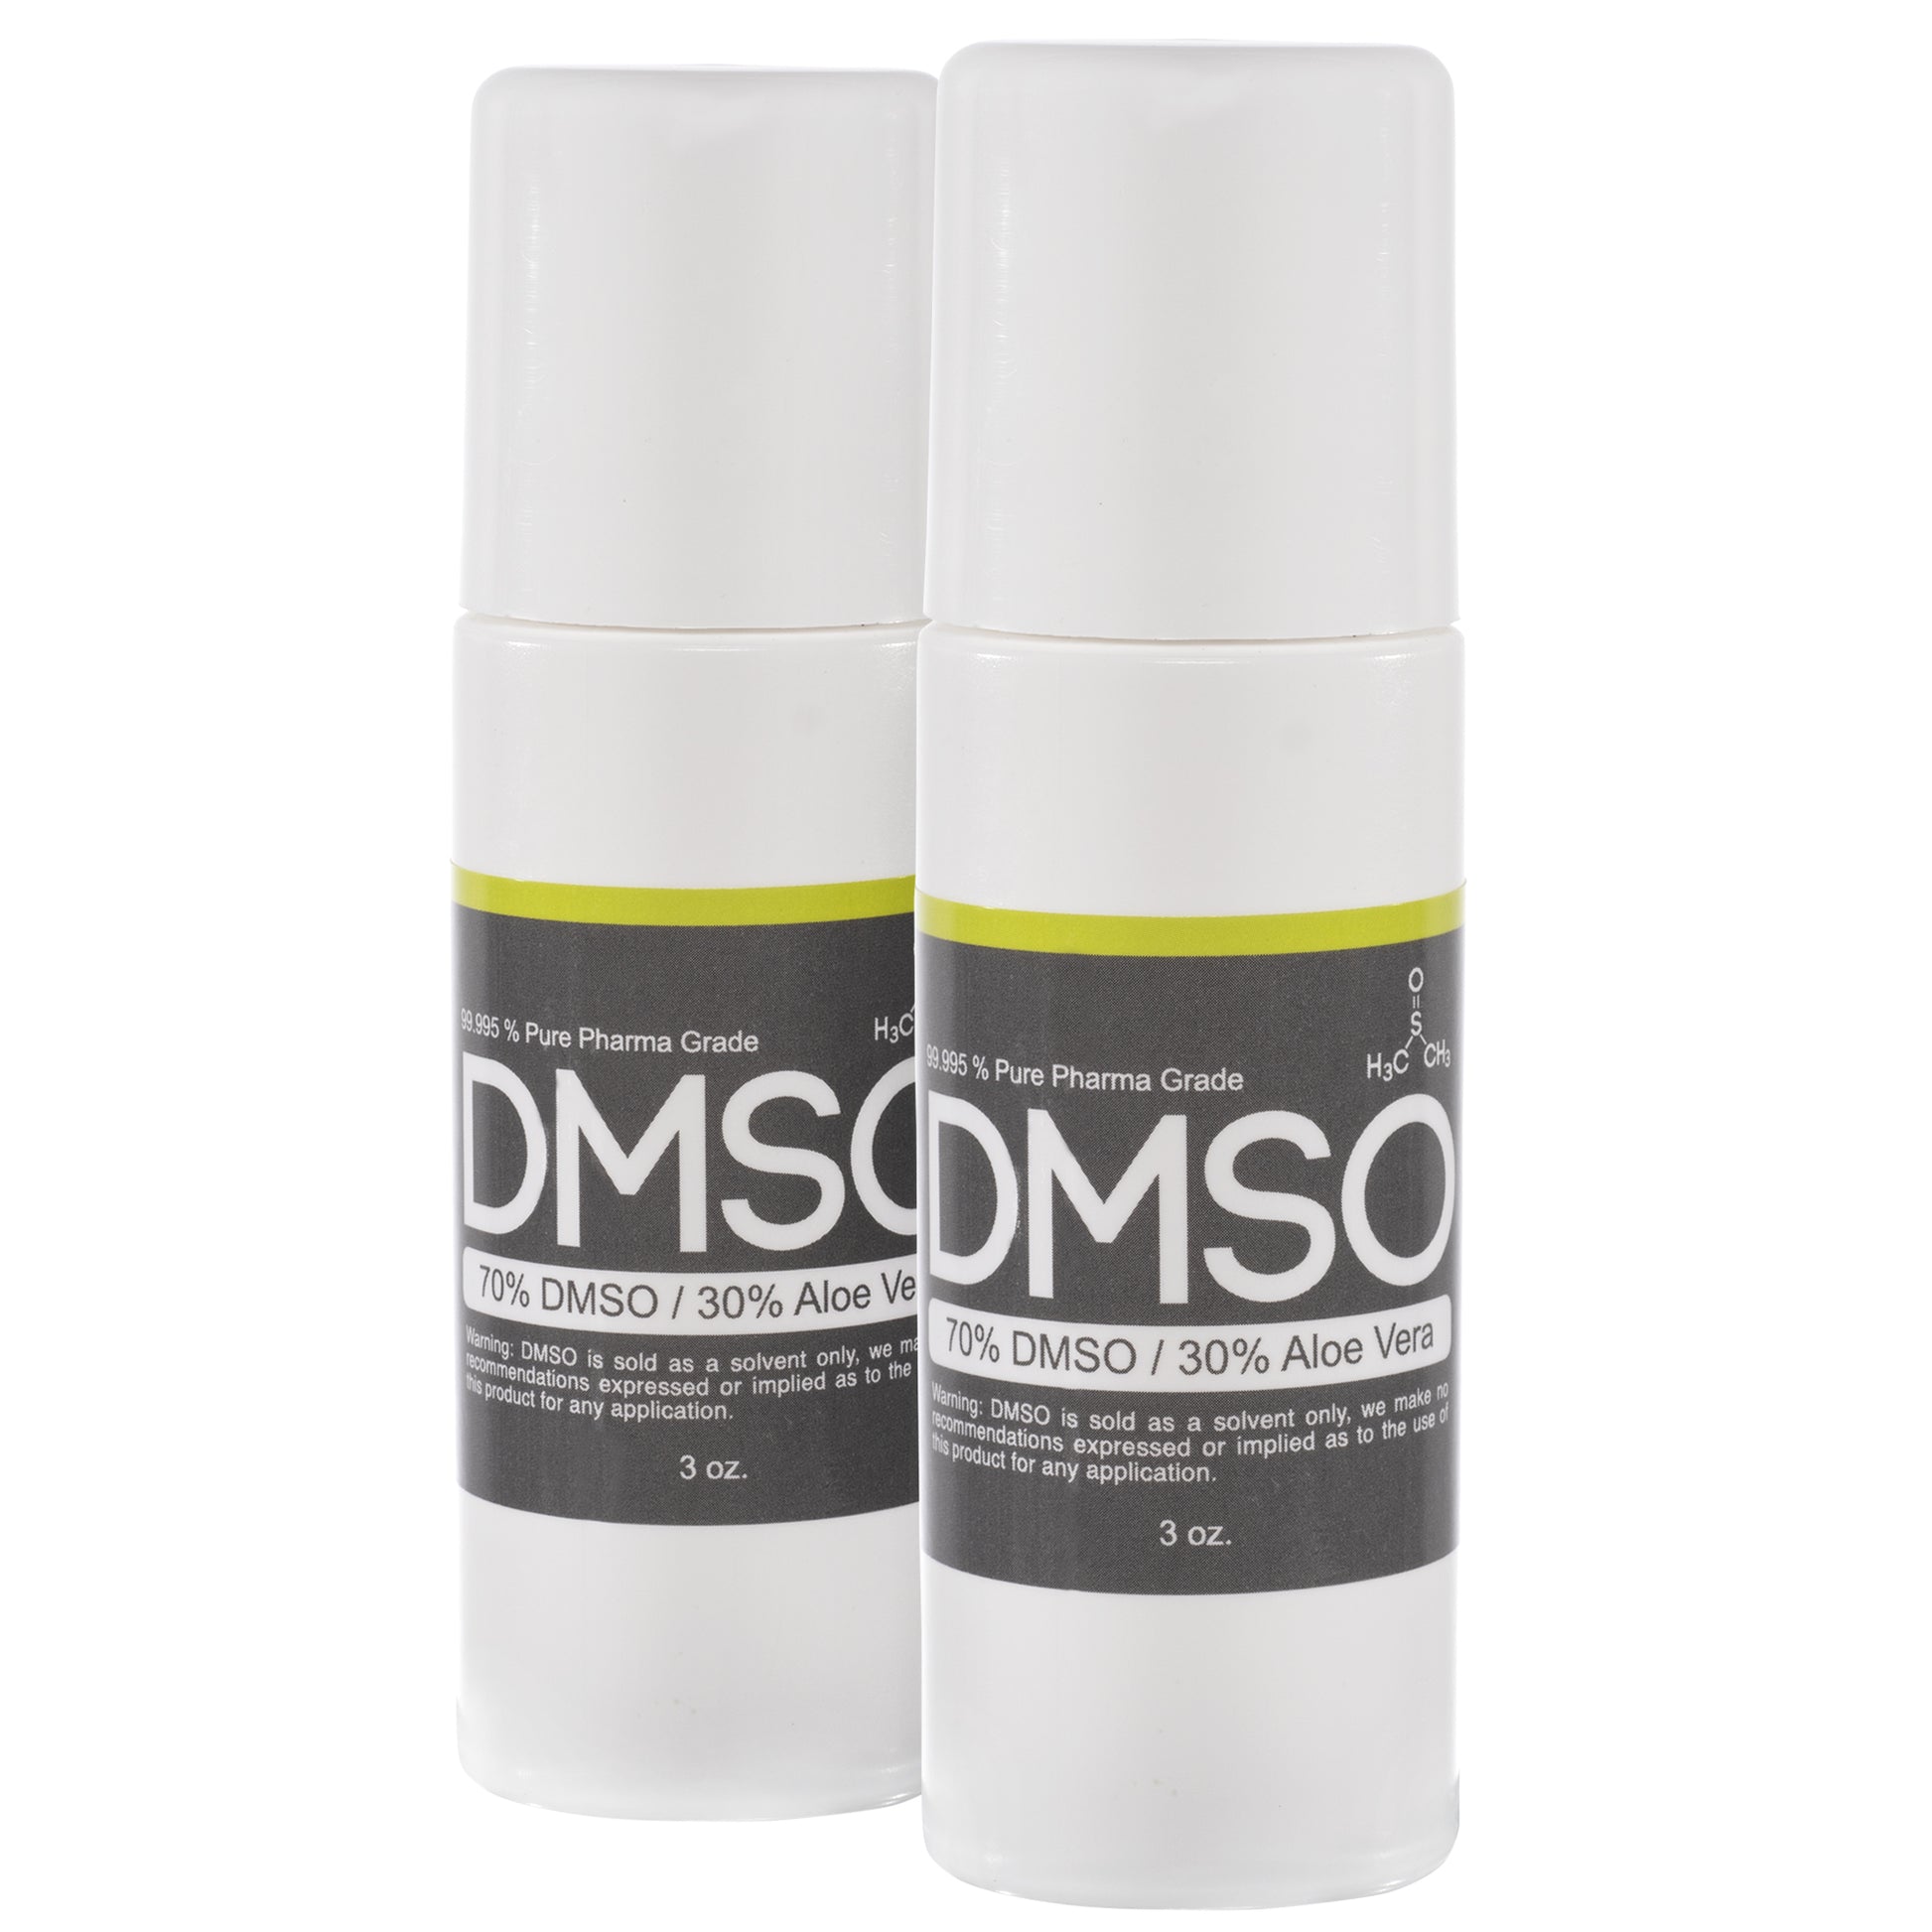 Potent odorless solvent DMSO 70% solution, versatile application in labs, industries and hobbies. 3oz bottle for easy storage and handling. Highly pure pharmaceutical grade dimethyl sulfoxide formulation with 30% deionized water - trusted for your needs. Buy now from a reputable supplier to experience the power of this remarkable universal solvent. two bottles. 2 bottles 